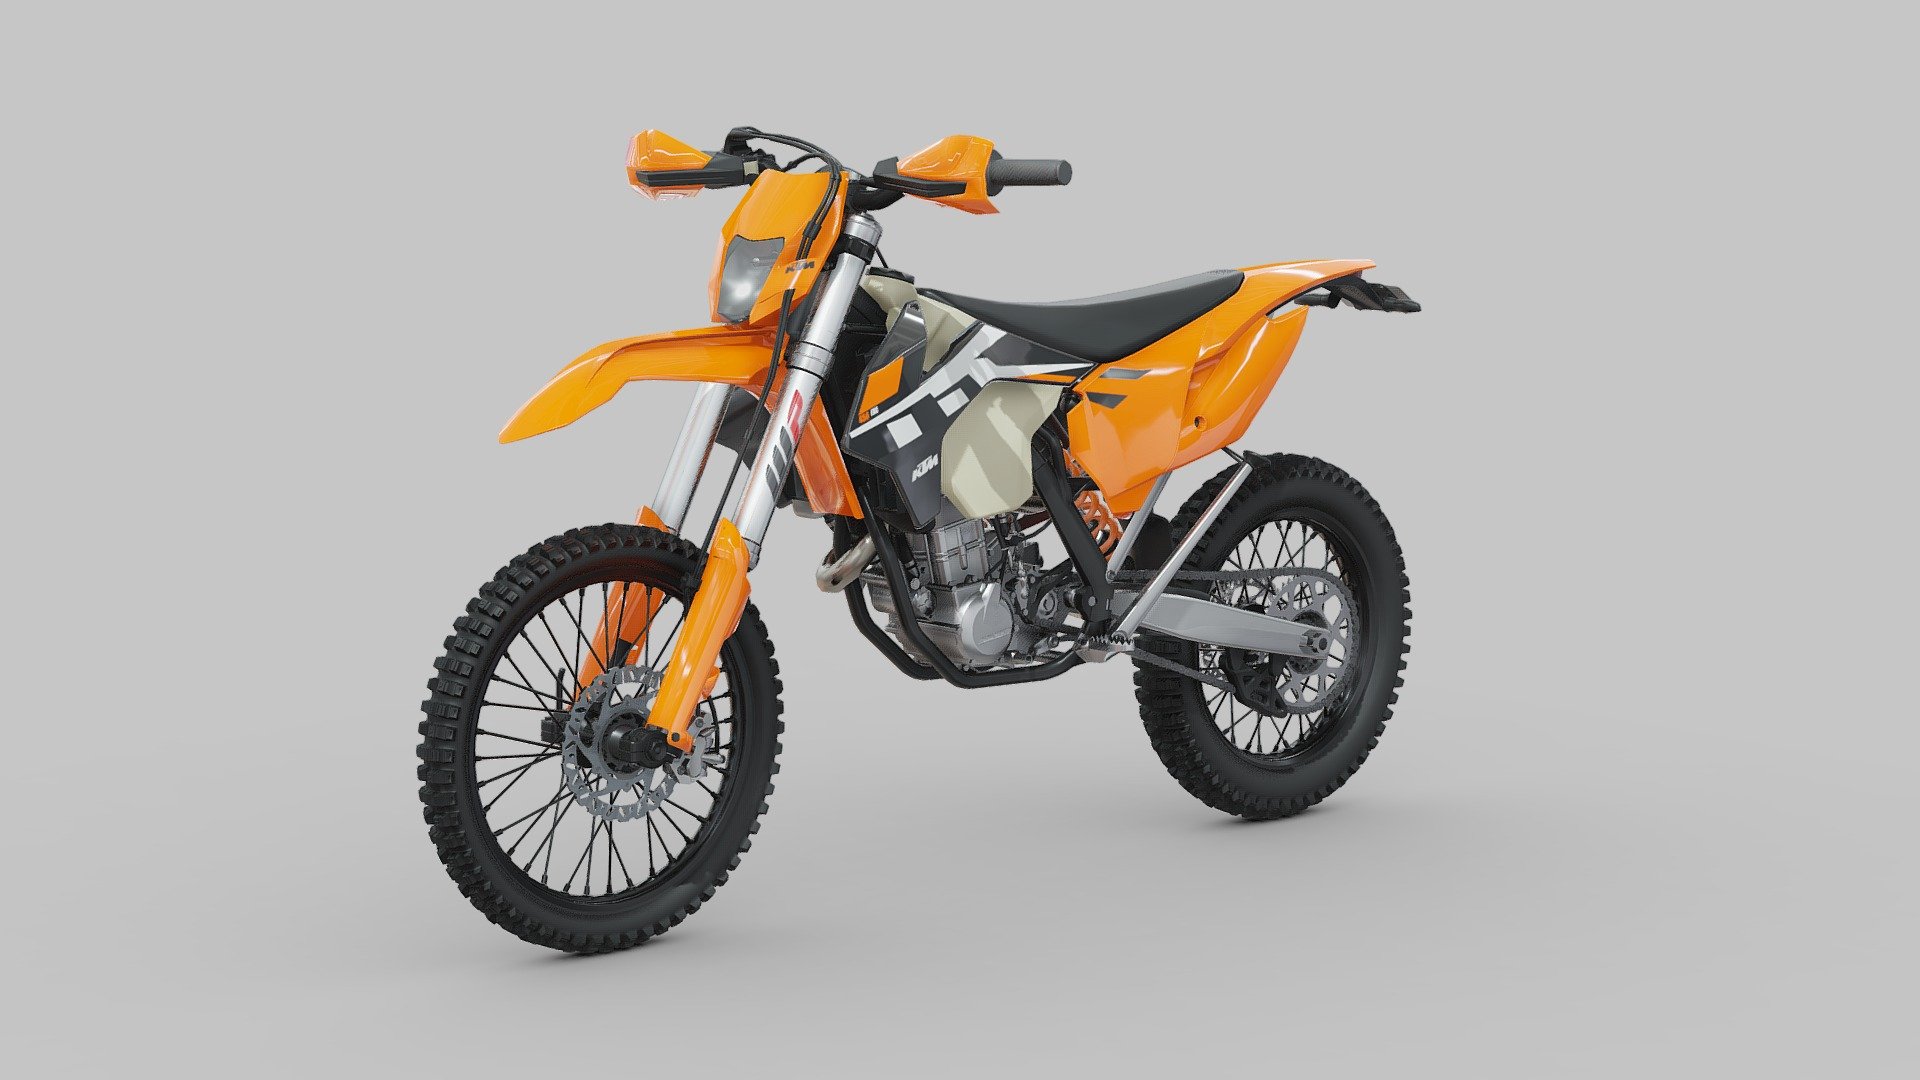 The KTM 450EXC is a versatile and high-performance off-road motorcycle designed to conquer a wide range of terrain with ease. Engineered by the renowned Austrian manufacturer KTM, the 450EXC blends agility, power, and durability to excel in both competitive enduro racing and adventurous trail riding.

At its core lies a potent 450cc single-cylinder engine, meticulously tuned to deliver robust torque and responsive power delivery across the RPM range. Equipped with advanced fuel injection and a lightweight chassis, the 450EXC offers precise handling and nimble maneuverability, allowing riders to tackle challenging obstacles with confidence.

Whether navigating tight trails, conquering rocky terrain, or competing in enduro races, the KTM 450EXC stands as a versatile and capable companion for riders seeking adrenaline-fueled adventures off the beaten path 3d model